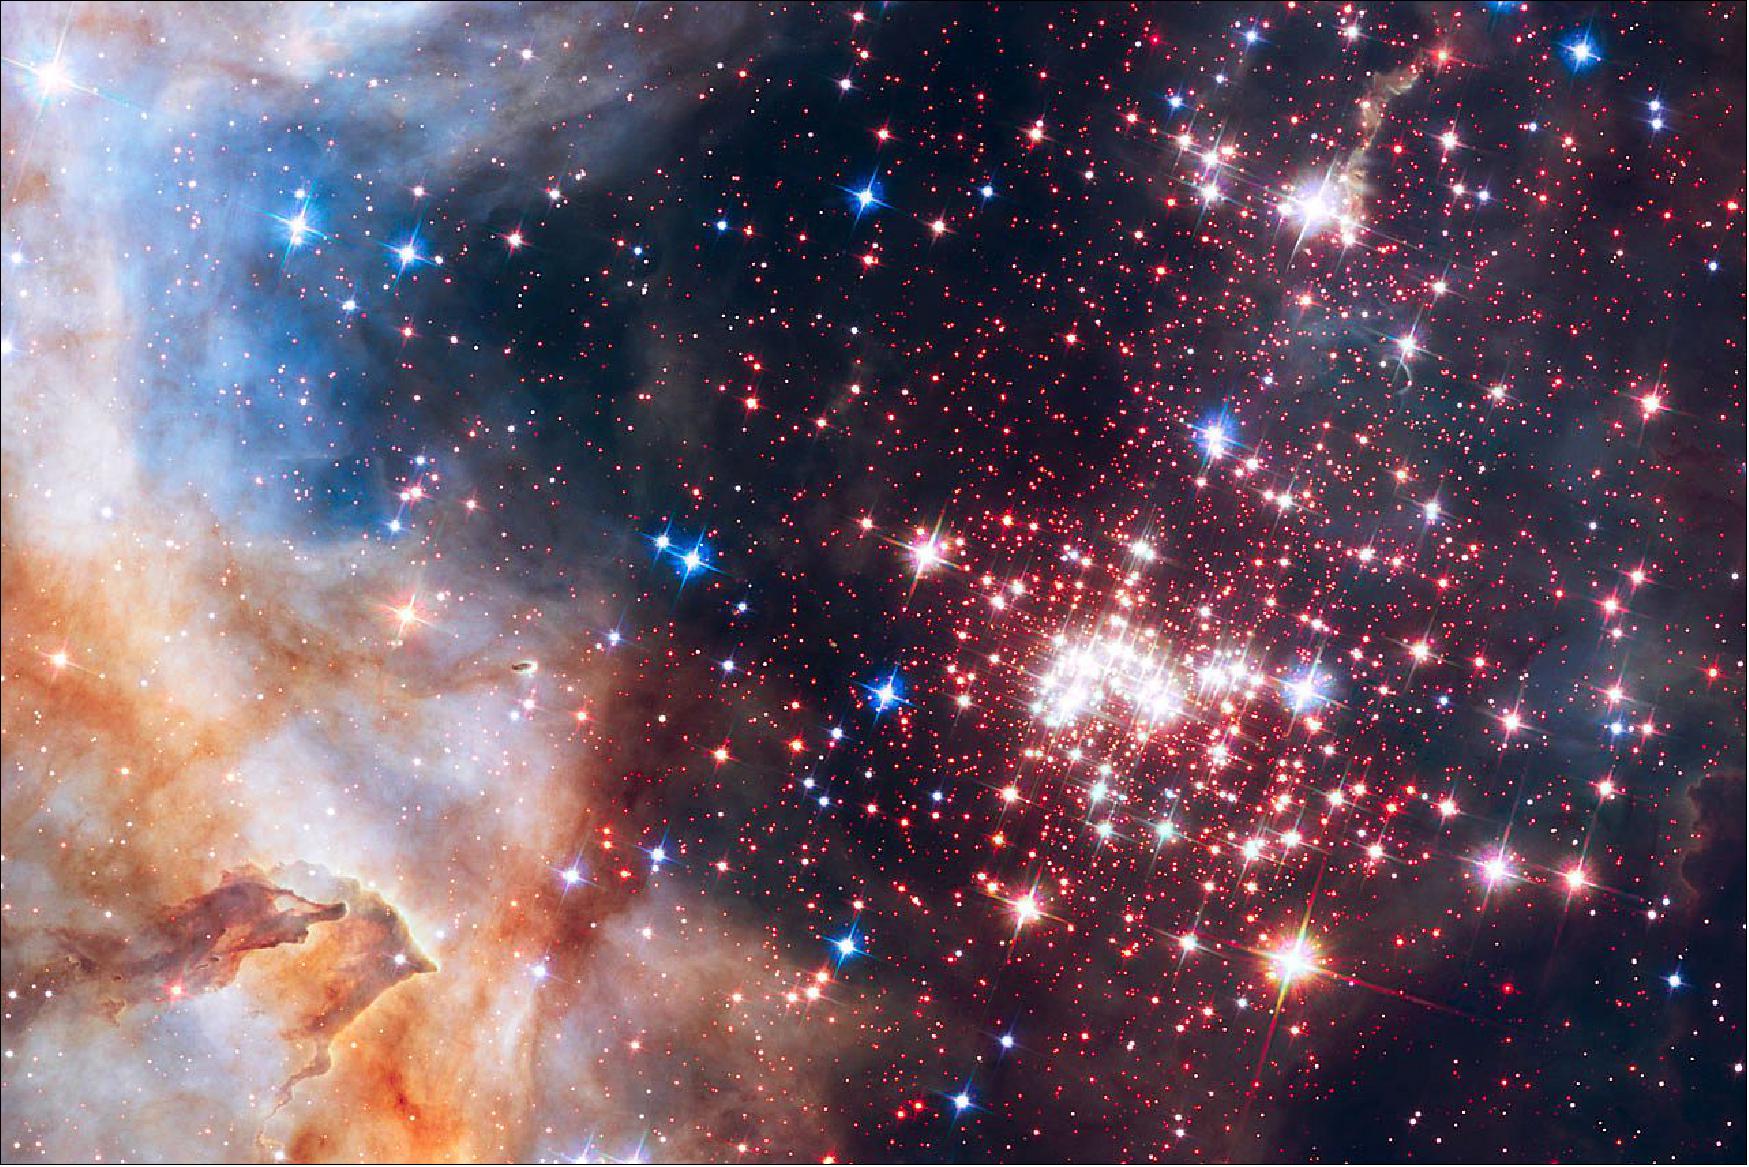 Figure 58: The star cluster Westerlund 2 (Milky Way). This image shows the sparkling centerpiece of Hubble's 25th anniversary tribute. Westerlund 2 is a giant cluster of about 3000 stars located 20,000 light-years away in the constellation Carina. Hubble's near-infrared imaging camera pierces through the dusty veil enshrouding the stellar nursery, giving astronomers a clear view of the dense concentration of stars in the central cluster (image credit: NASA, ESA, the Hubble Heritage Team (STScI/AURA), A. Nota (ESA/STScI), and the Westerlund 2 Science Team)